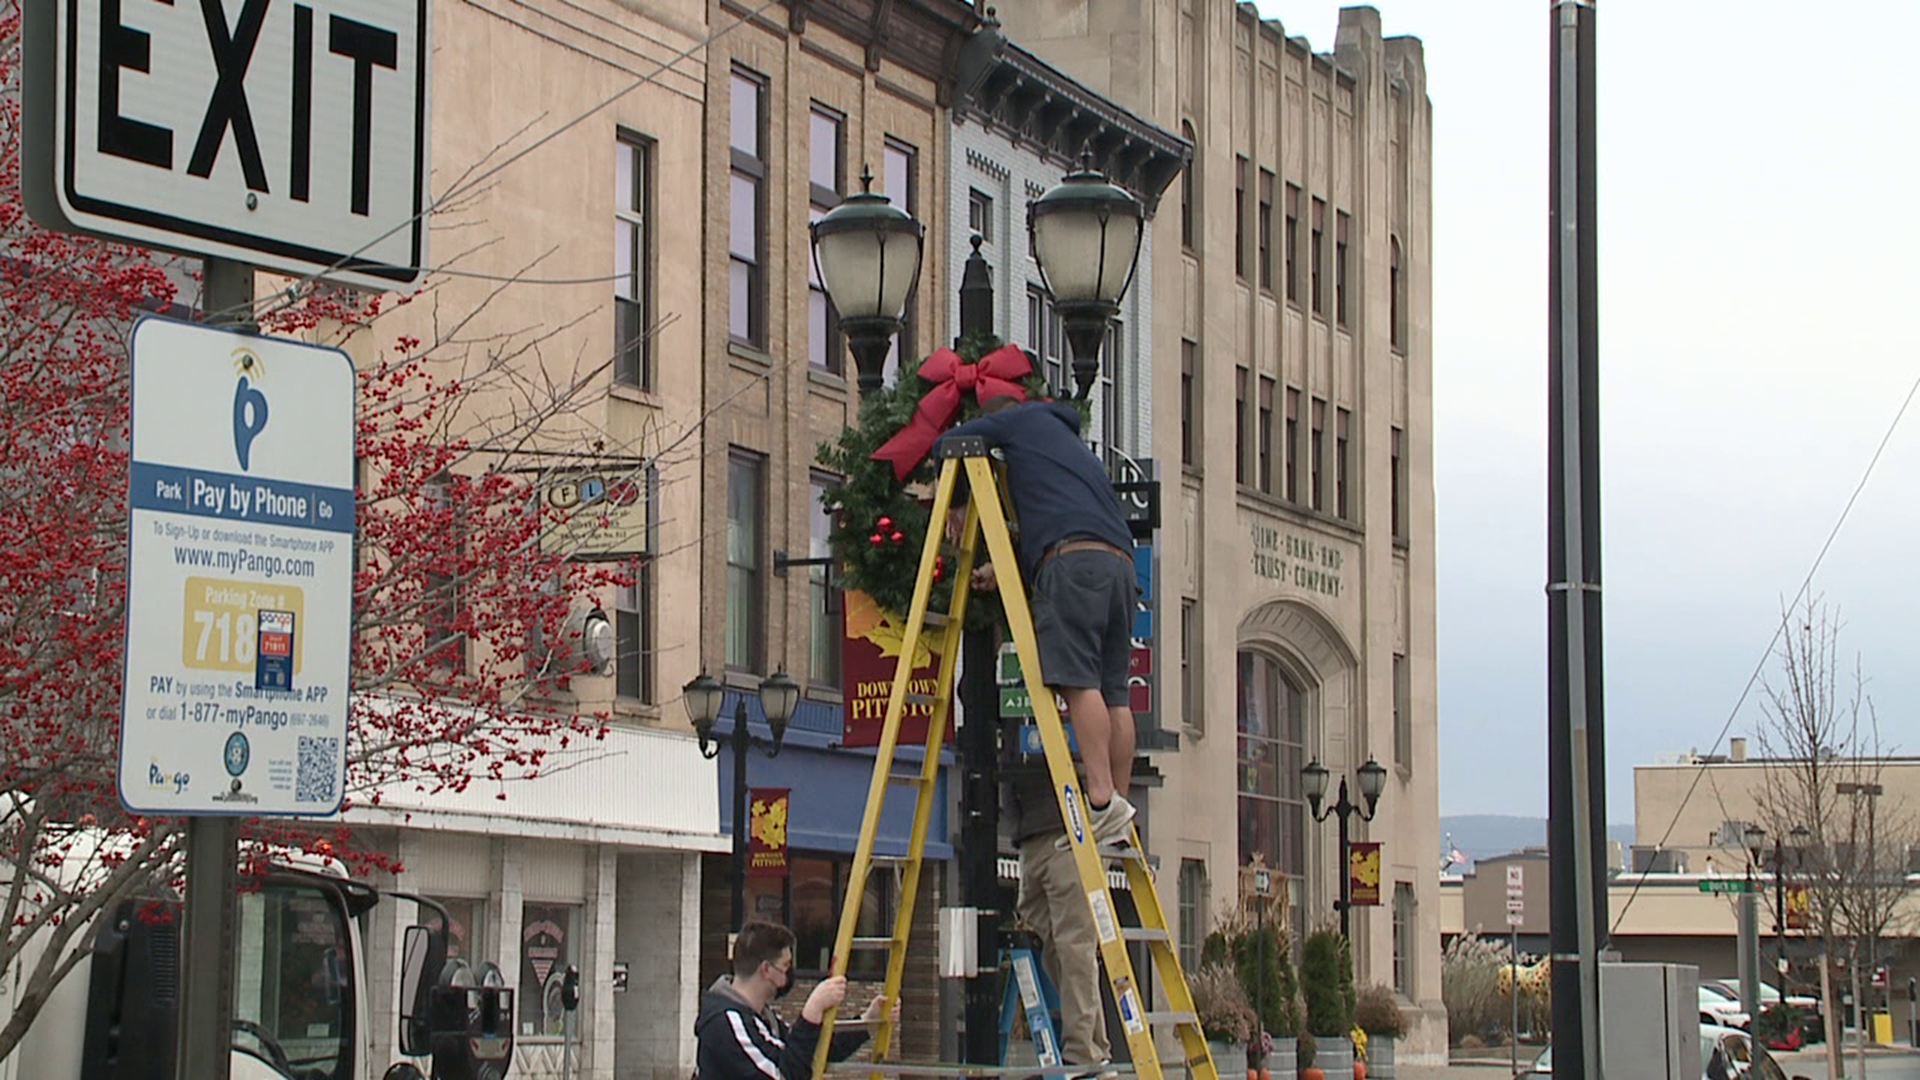 Volunteers worked to place banners and wreaths along Main Street in Pittston Saturday.